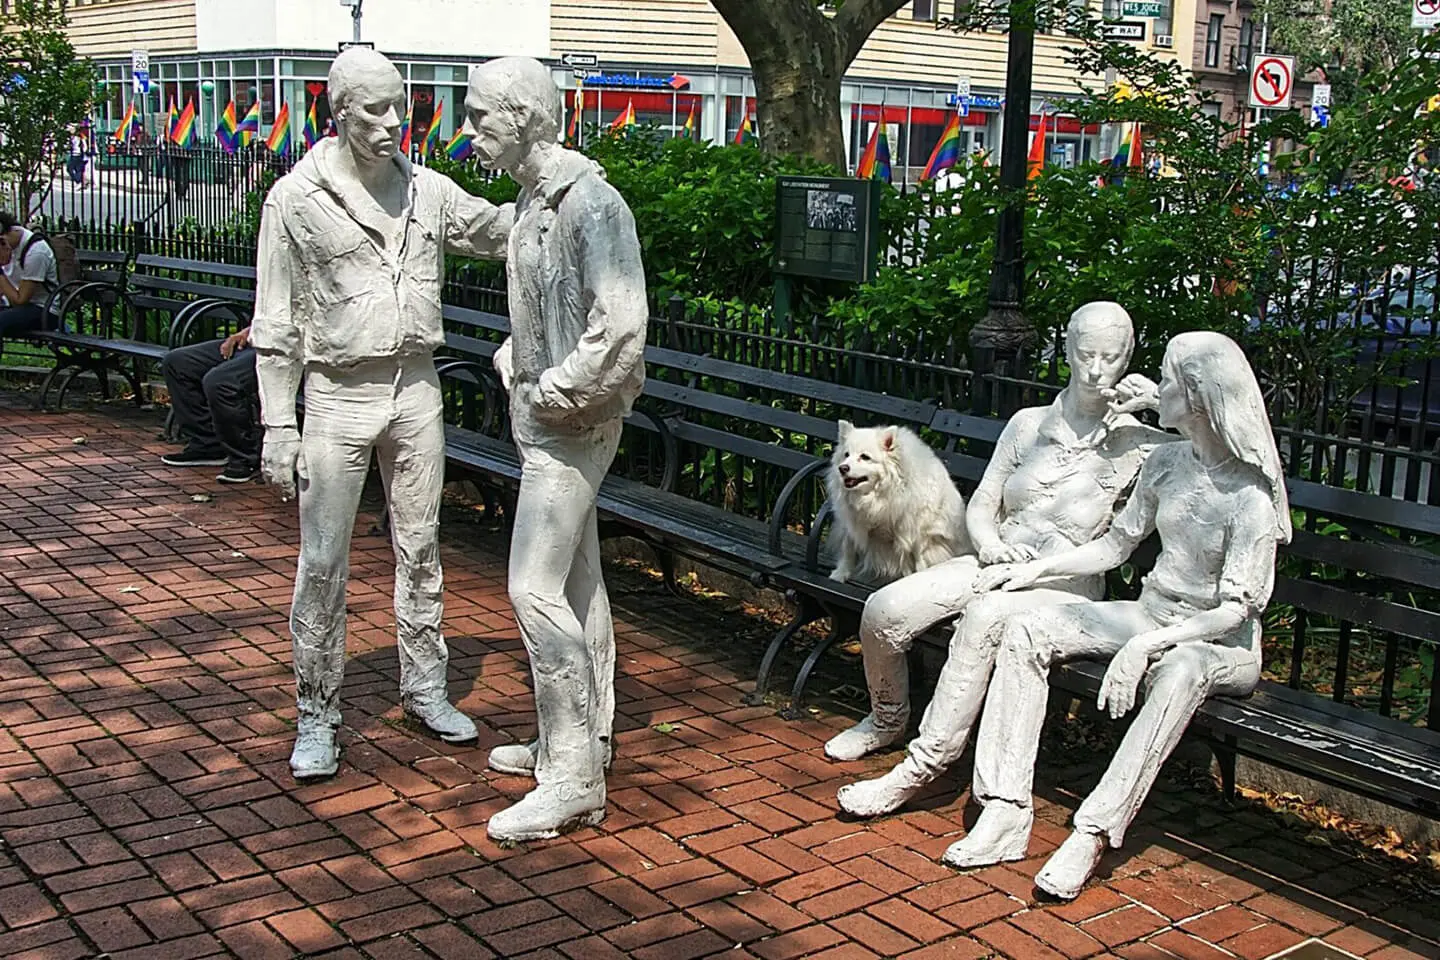 Life-sized statues depicting a group of figures in mid-conversation with a dog, situated in a public space with benches and trees in Manhattan.